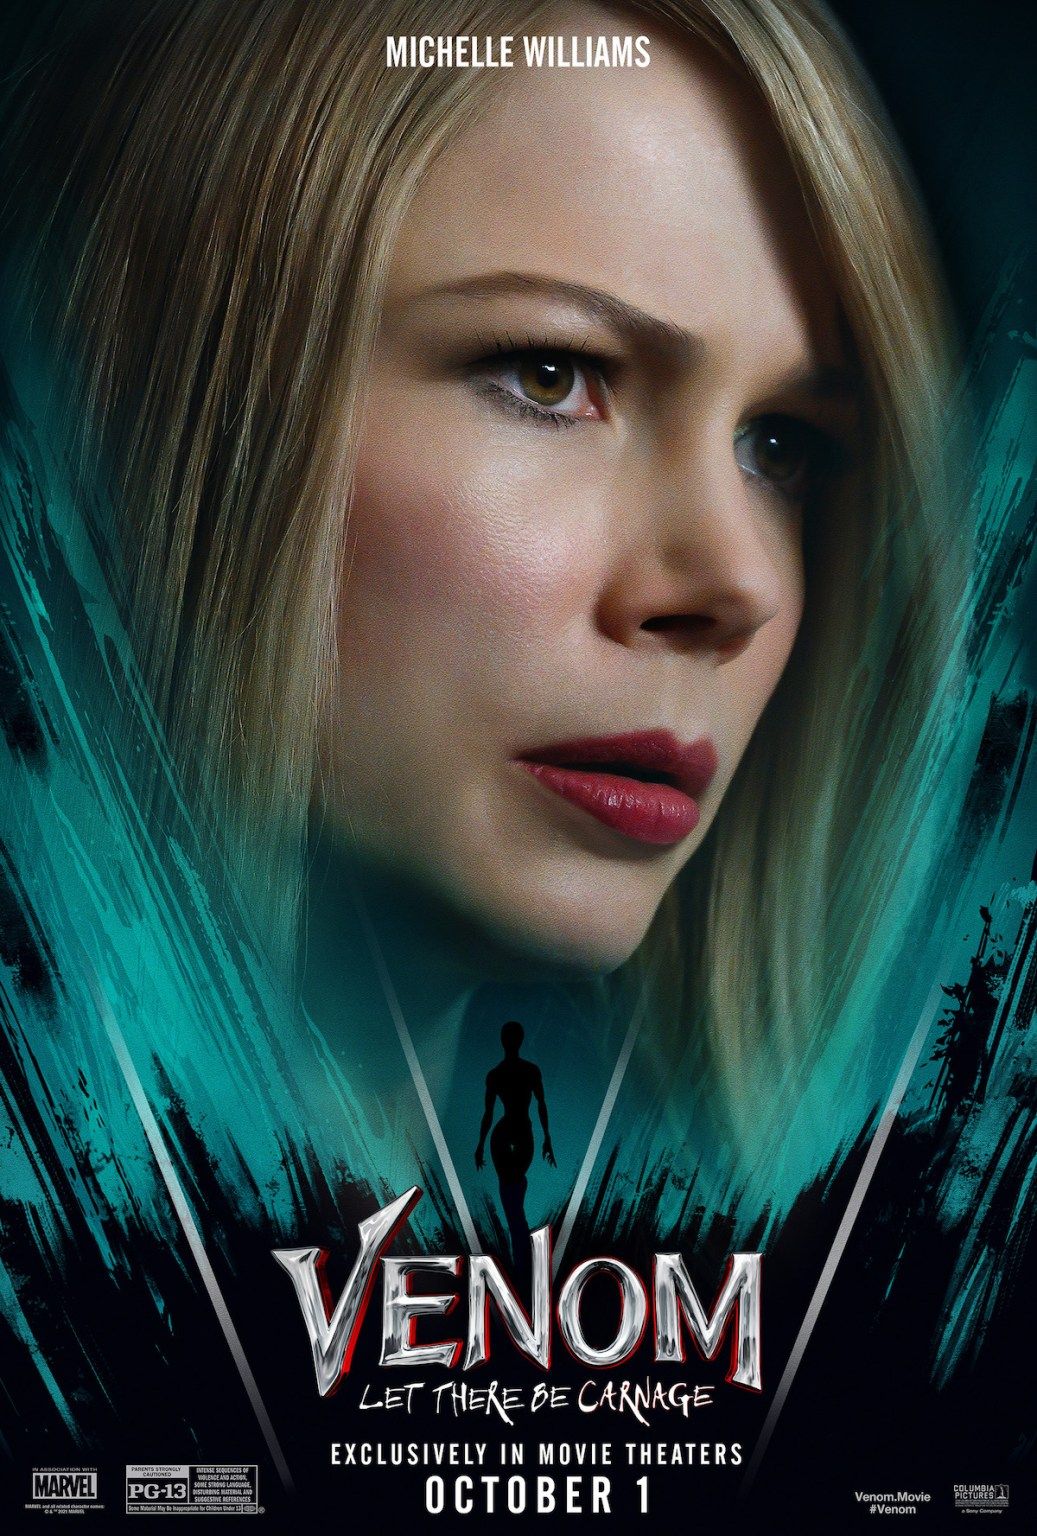 Michelle Williams As Anne In Venom 2 Character Poster